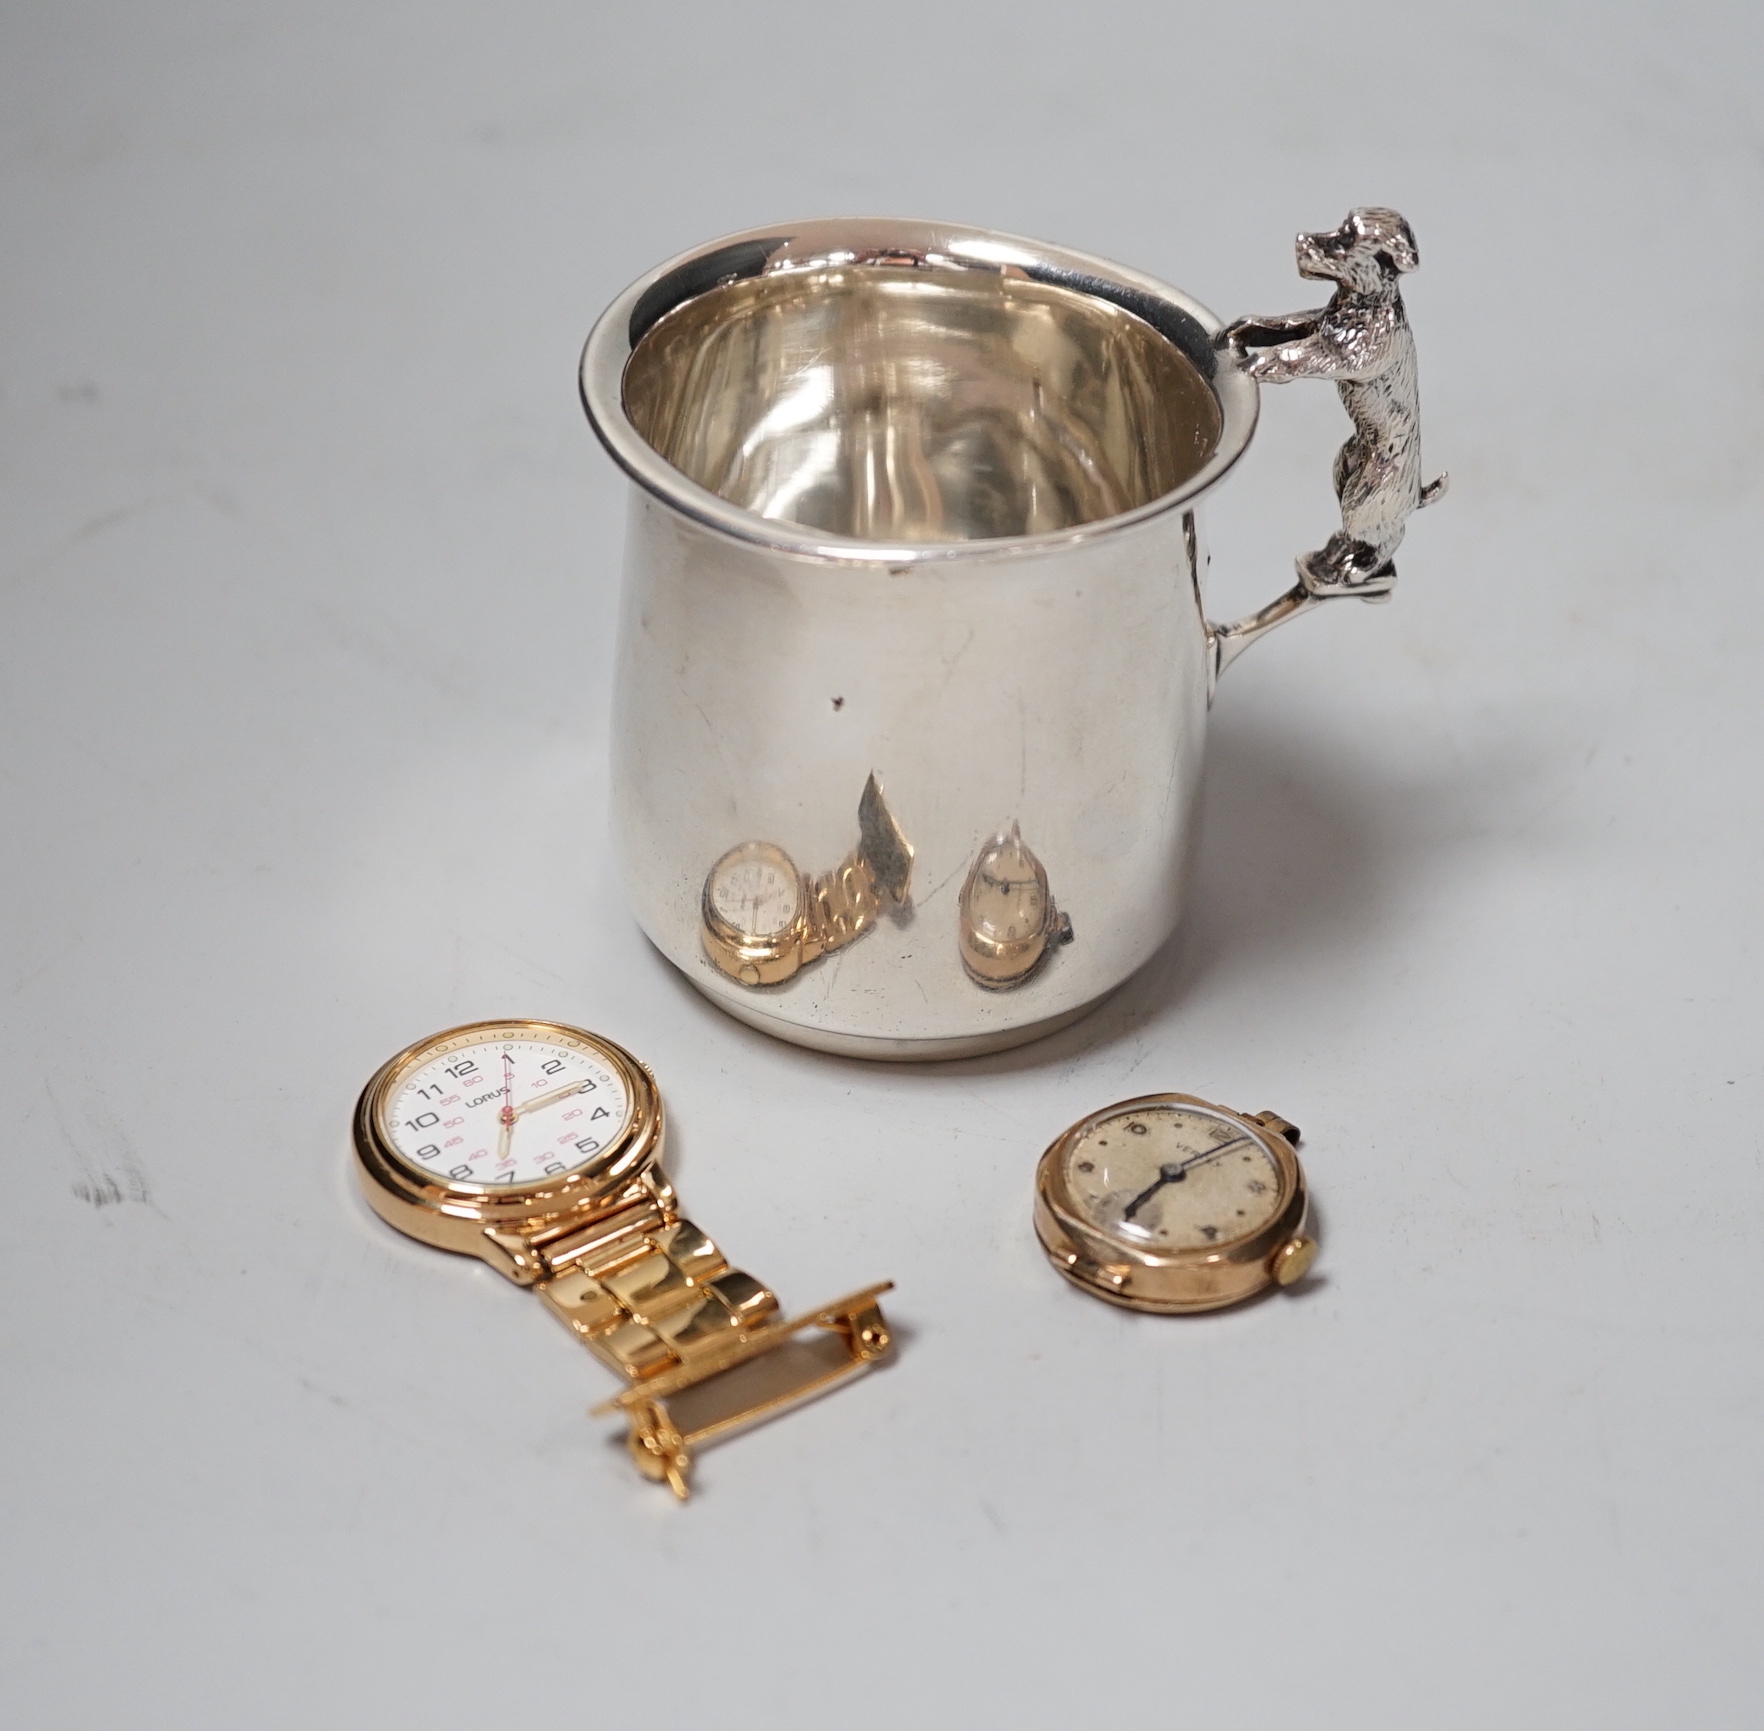 A George V silver christening mug, with dog handle, Sanders & Mackenzie, Birmingham, 1931, 77mm, together with a lady's 9ct gold Vertex manual wind wrist watch, no strap and a Lorus nurses watch.